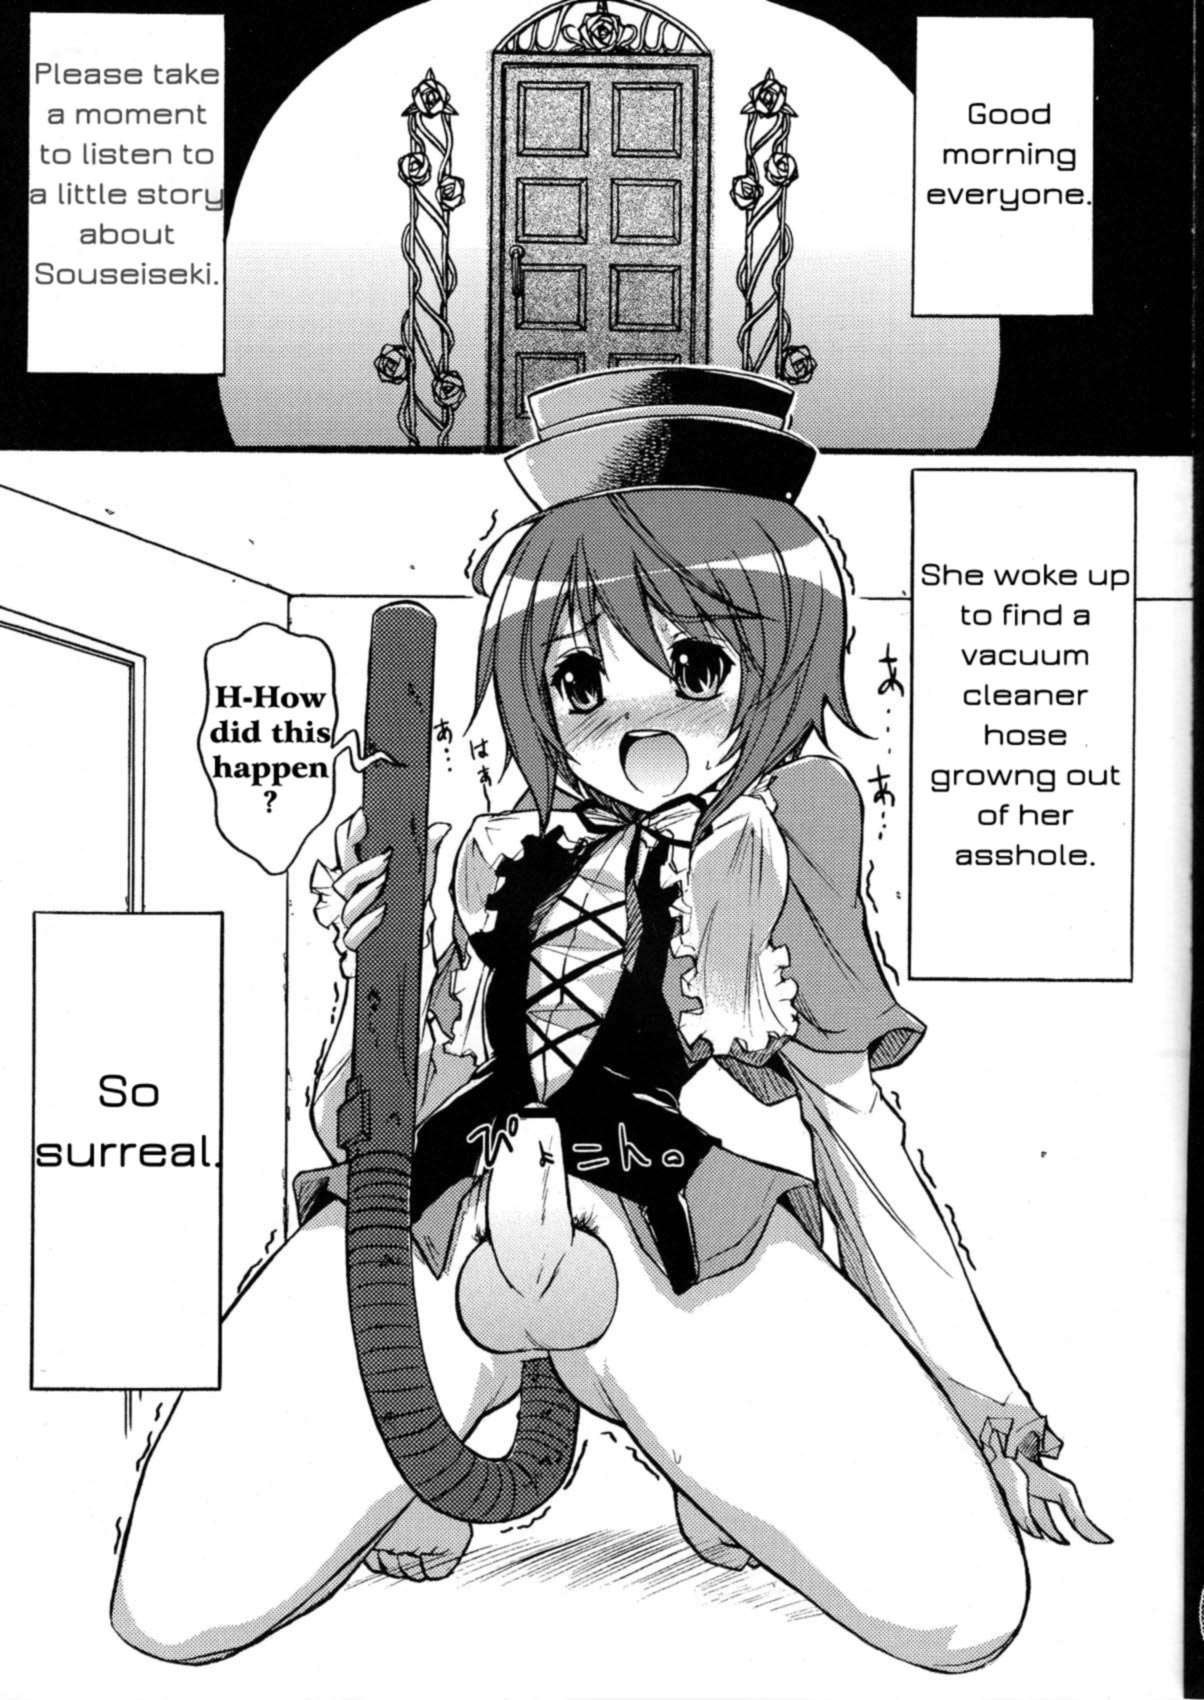 [Albireo 7 (Funky Function)] Let's Blue Cleaner (Rozen Maiden) [English] page 5 full